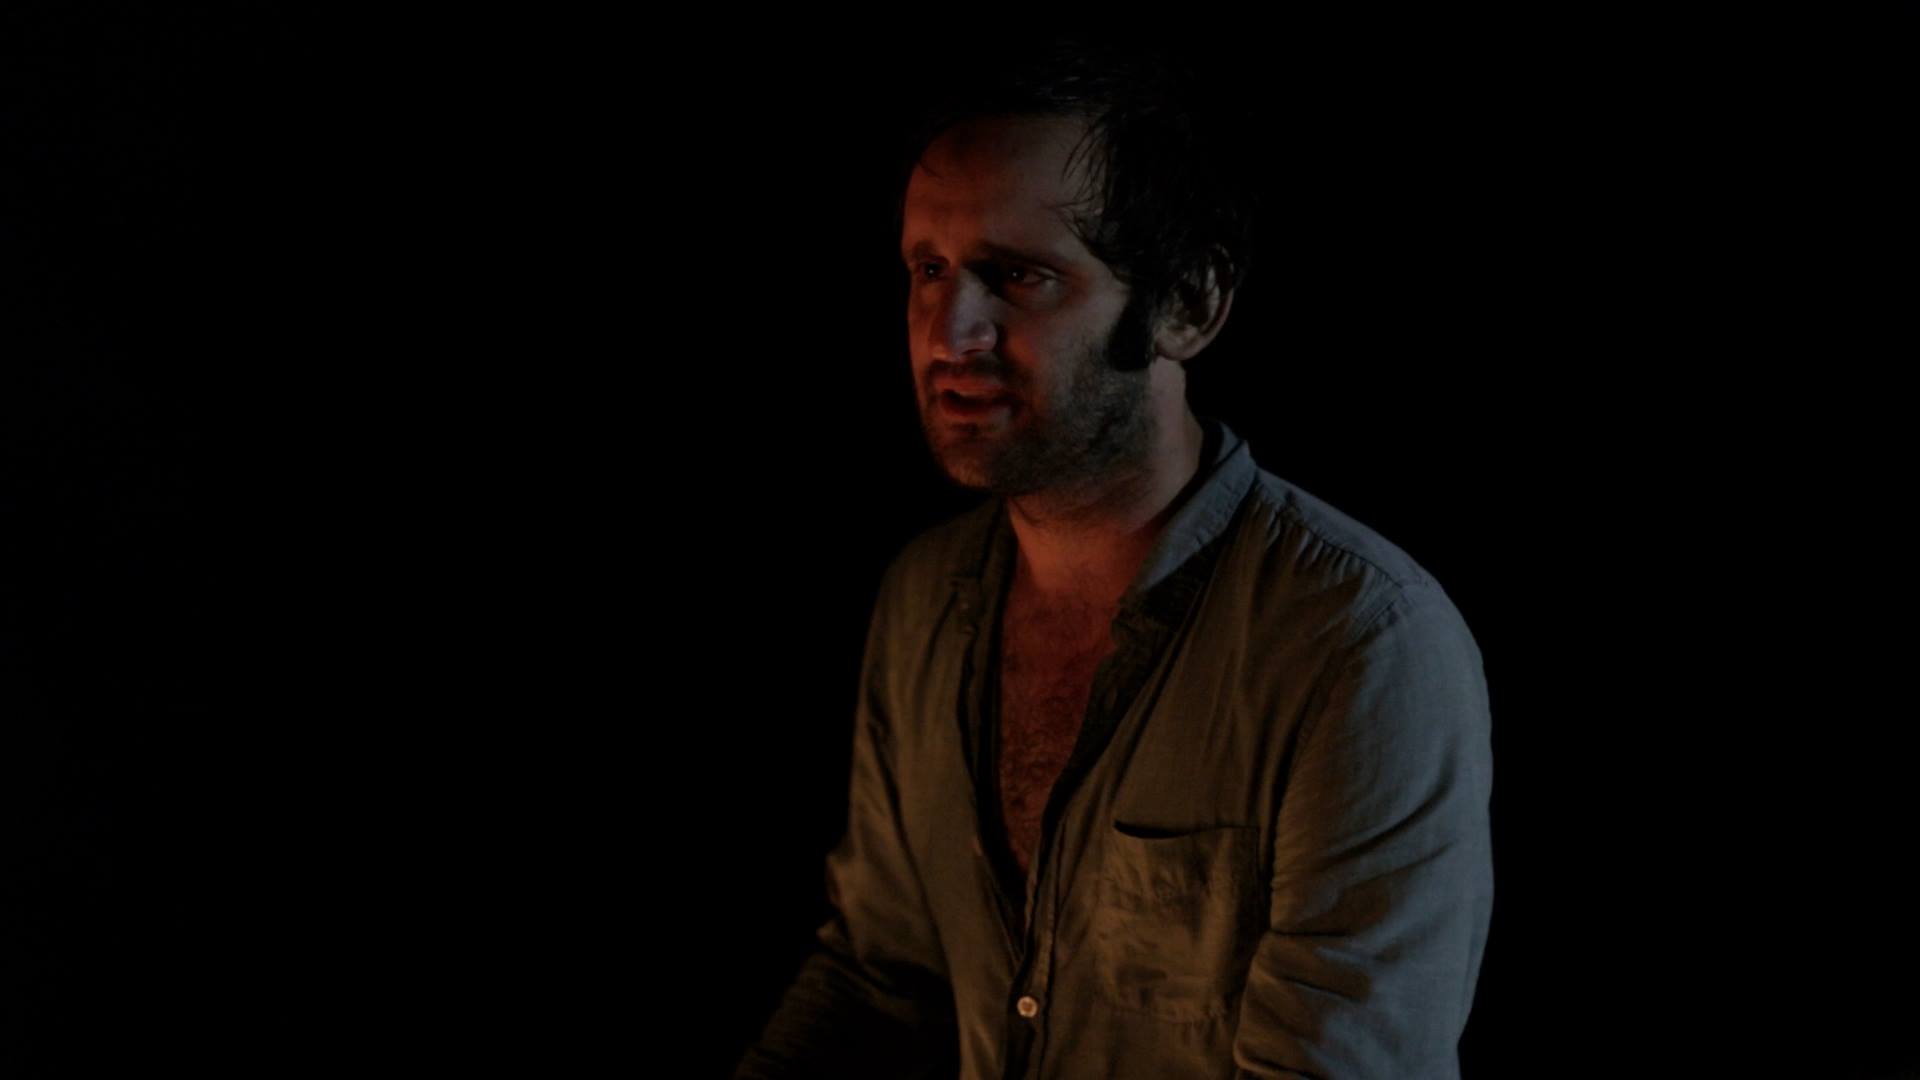 Screen grab from 'Lonely Boys'